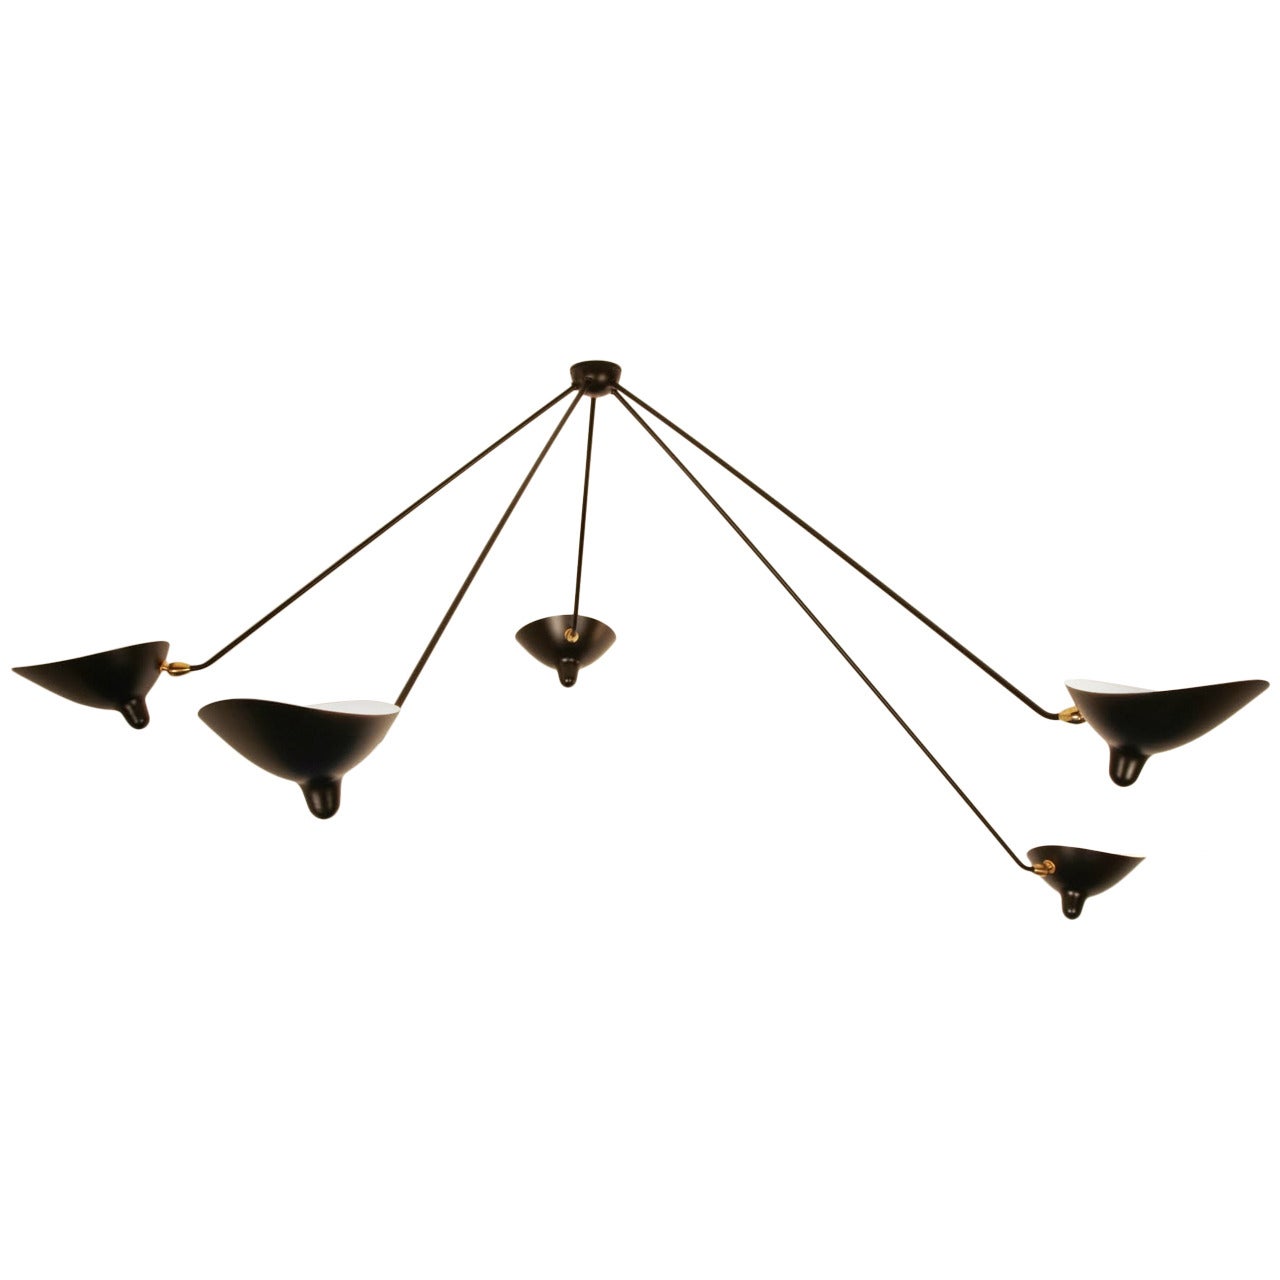 Serge Mouille Spider Ceiling Lamp with Five Arms